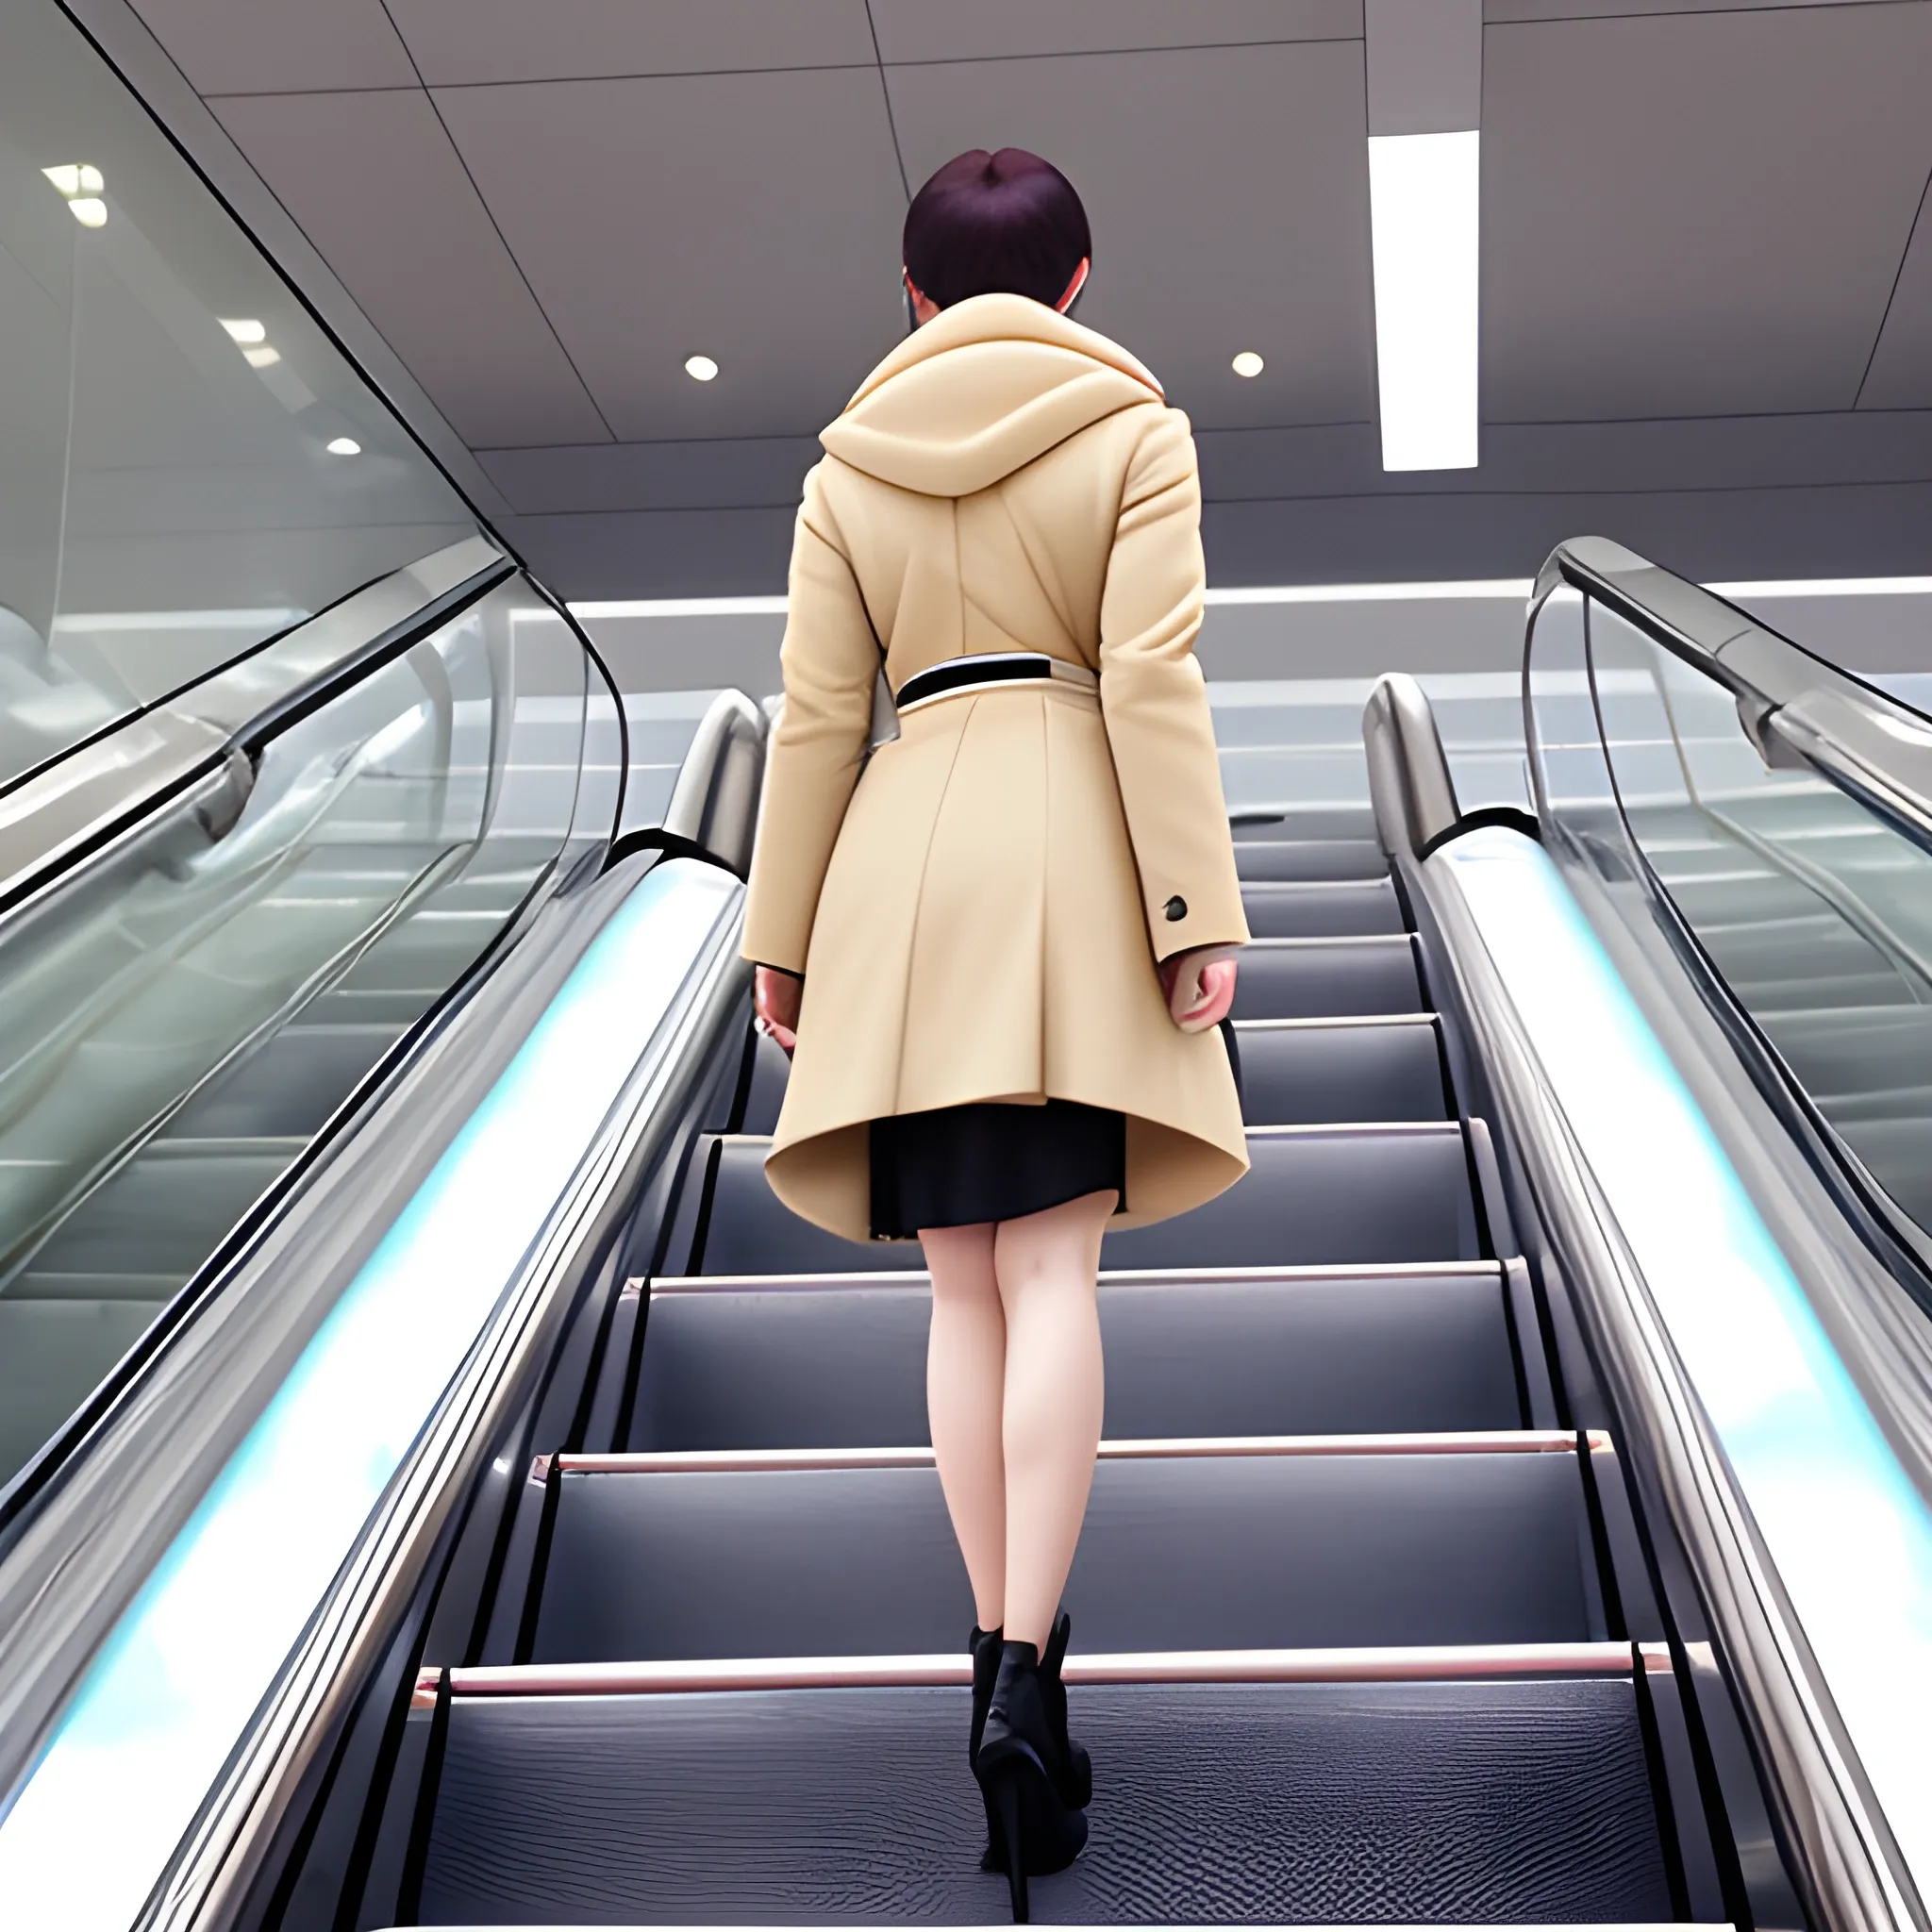 Escalator skirt ascent、the coat is short、Lower body close-up、looks from behind、The camera angle is very low、Slouched、Slouched、Protruding buttocks